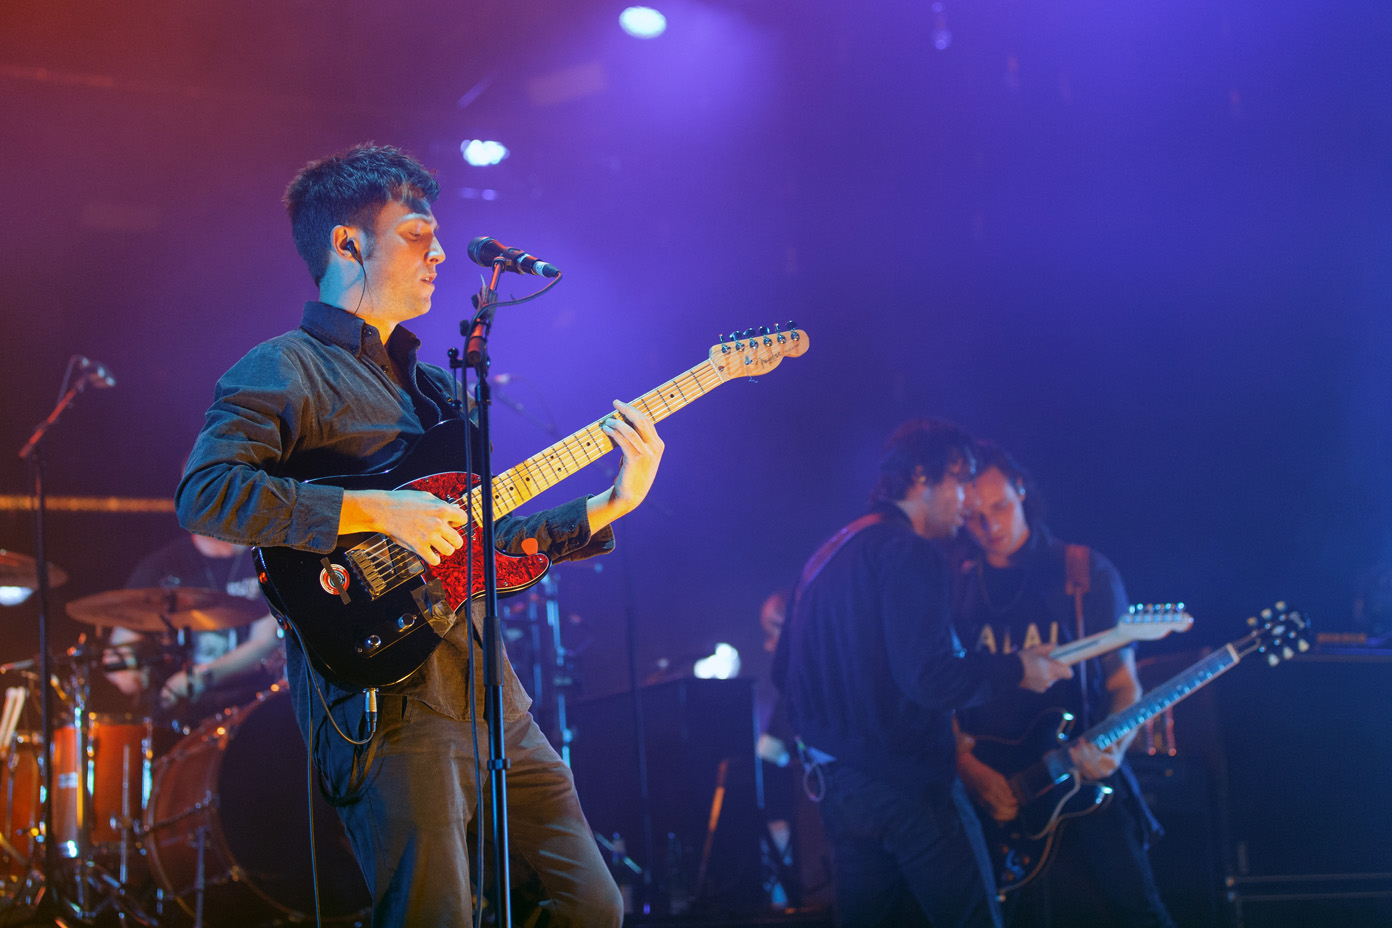 The Maccabees on stage at the O2 Apollo Manchester on 27 June 2017 during their farewell tour. Photo: Katy Blackwood